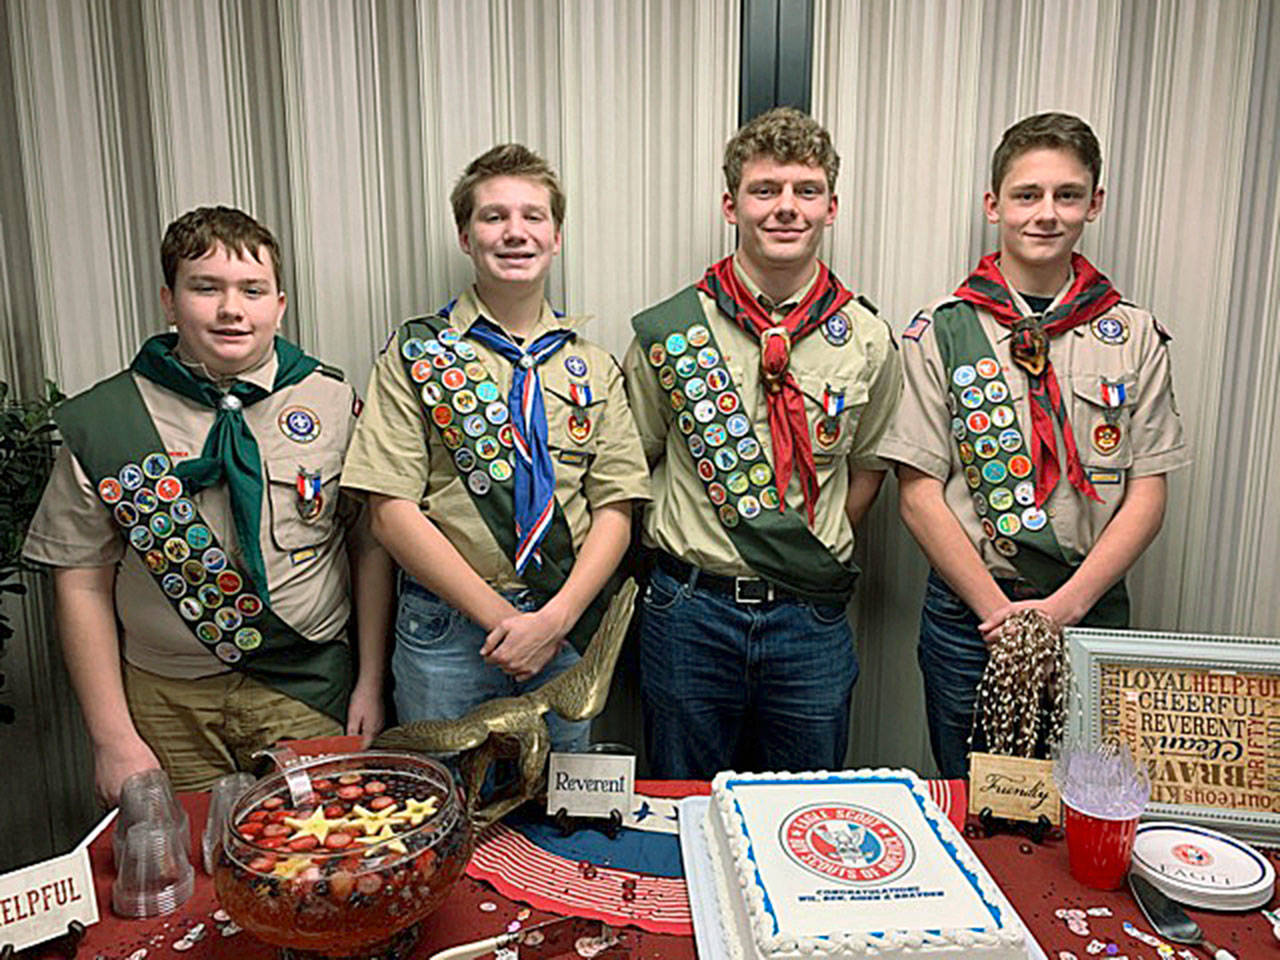 Boy Scout Troop 343 members, from left, Brayden Agnew, Aiden Grames, Ben Caillier and Wil Caillier recently earned the Eagle rank. COURTESY PHOTO